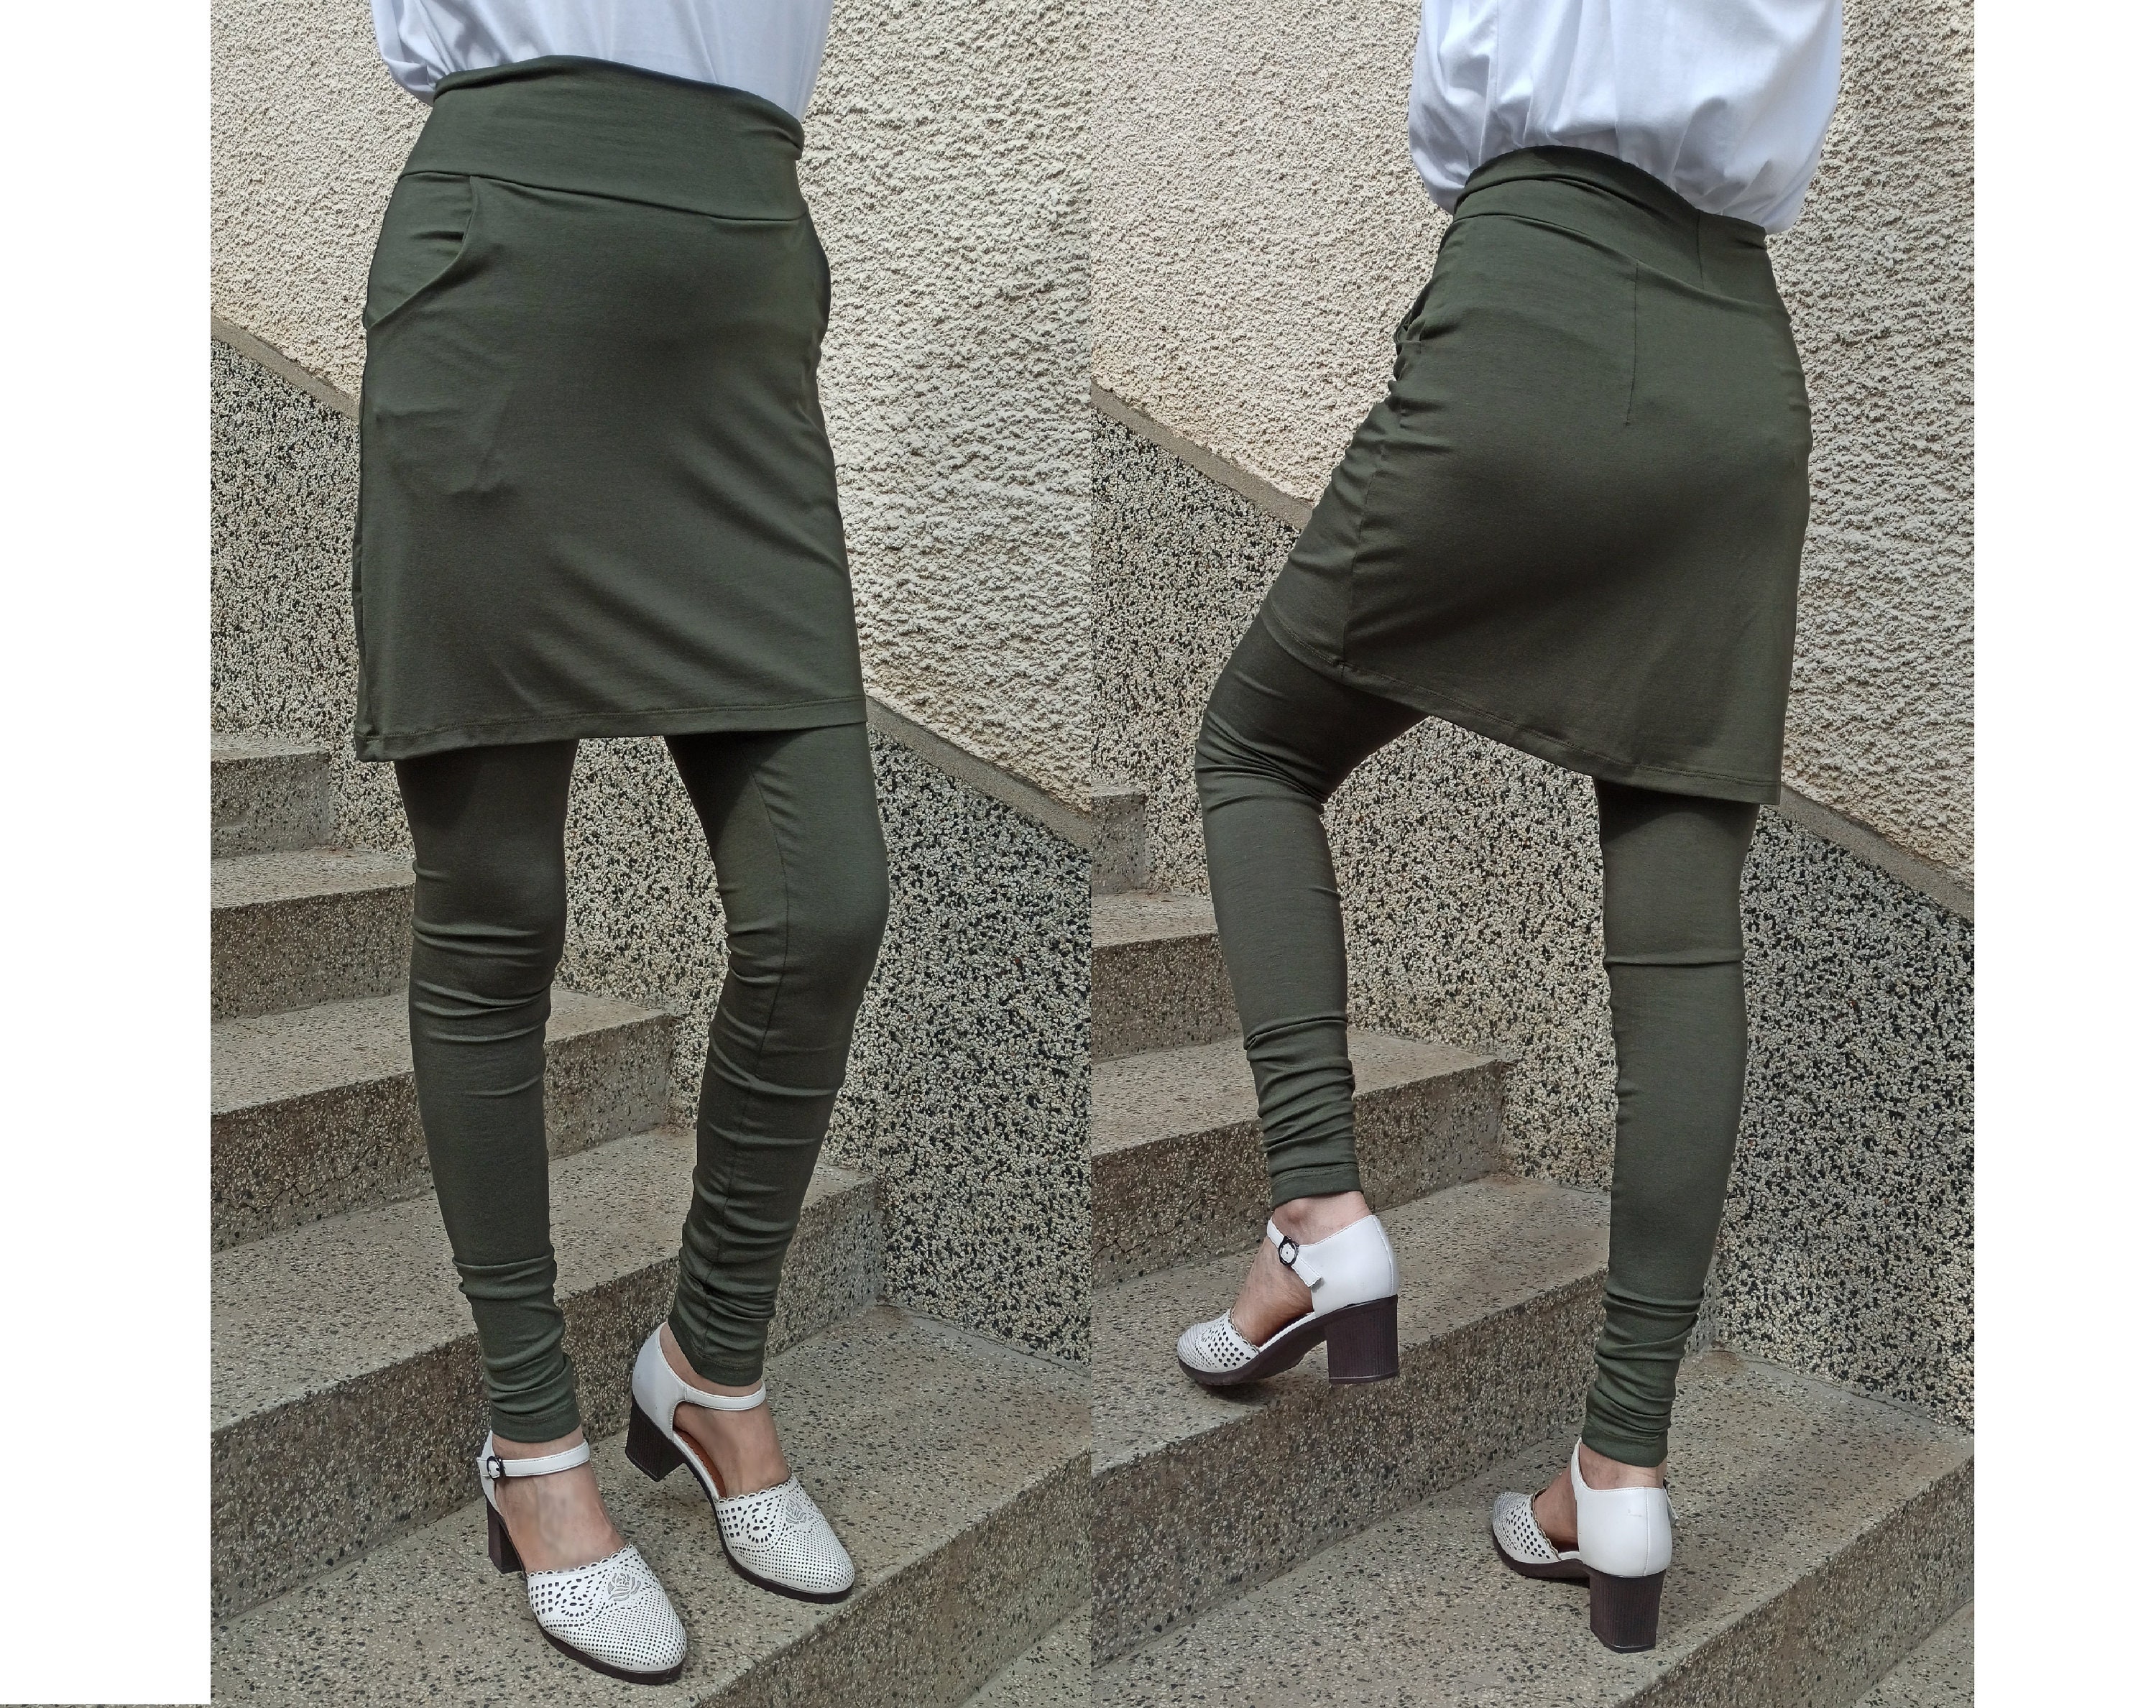 Buy Women's Leggings With a Skirt, Yoga Pants With an Attached Skirt Online  in India 